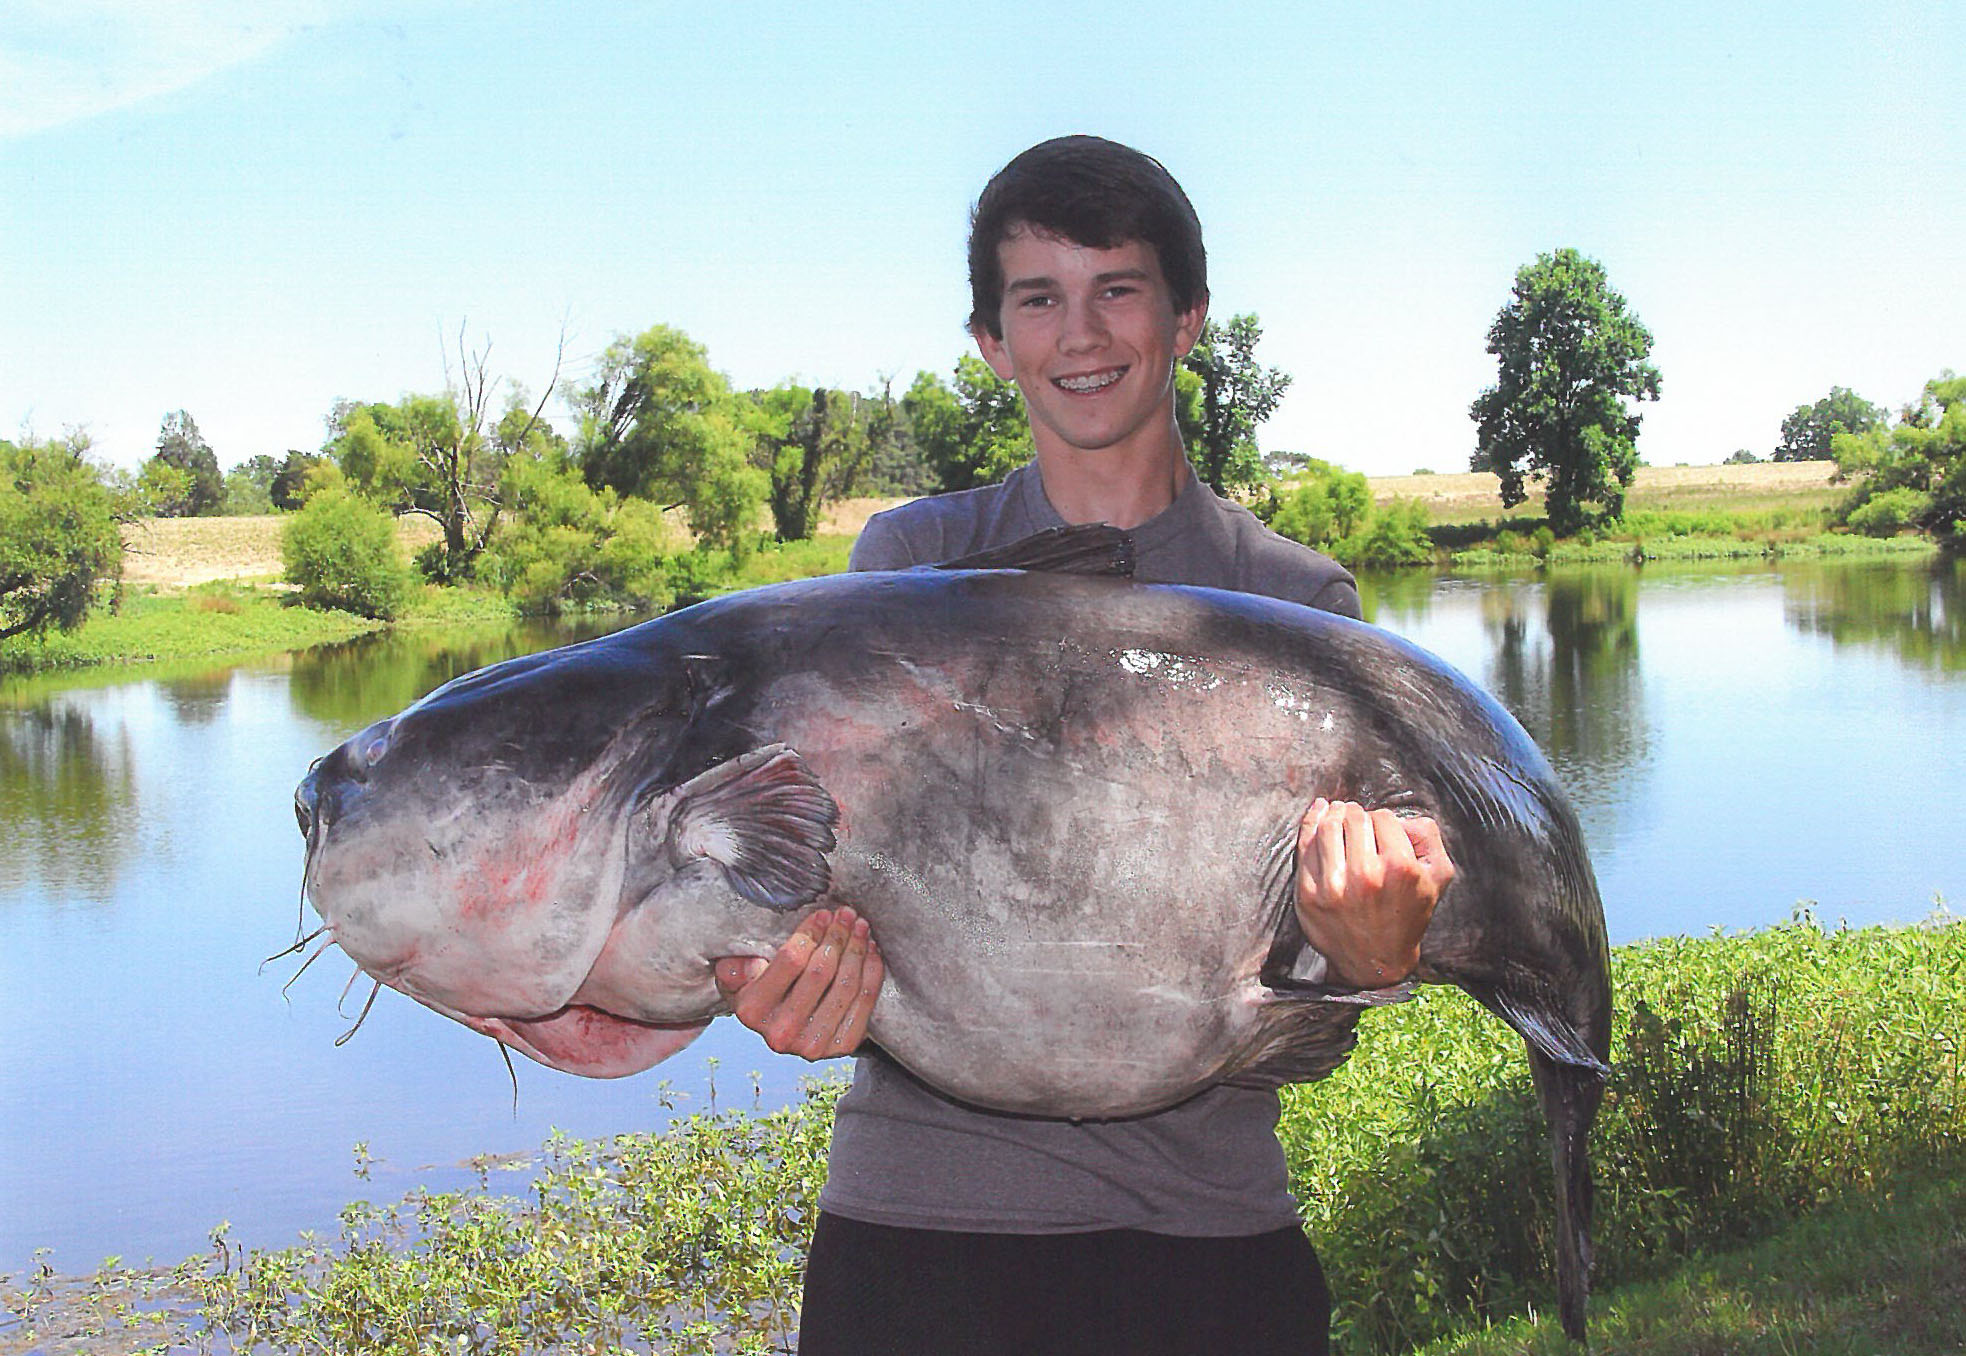 Photo Caption. Landon Evans, 15, holds the new state record for blue catfish - a 117-pound, 8 ounce fish, caught from Lake Gaston on June 11. Courtesy N.C. Wildlife Resources Commission